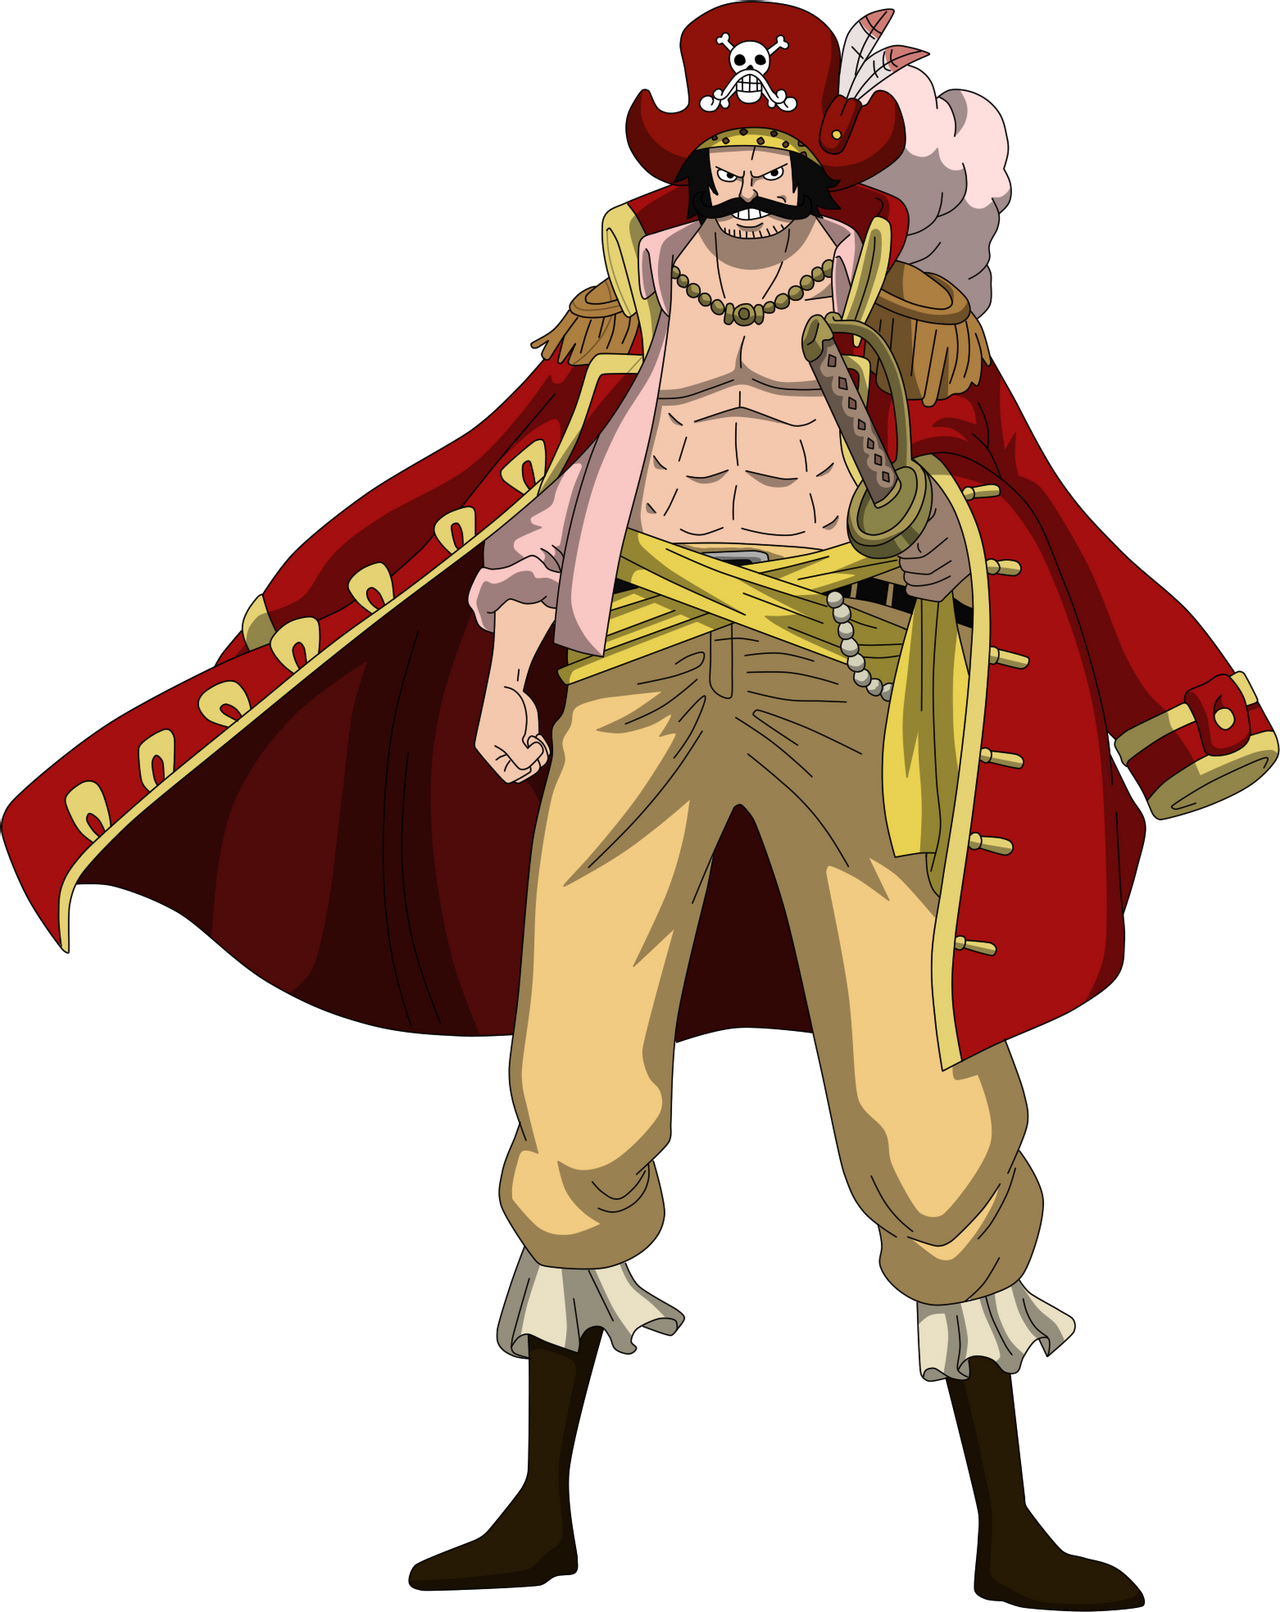 Gol D Roger - One Piece by caiquenadal on DeviantArt | One piece